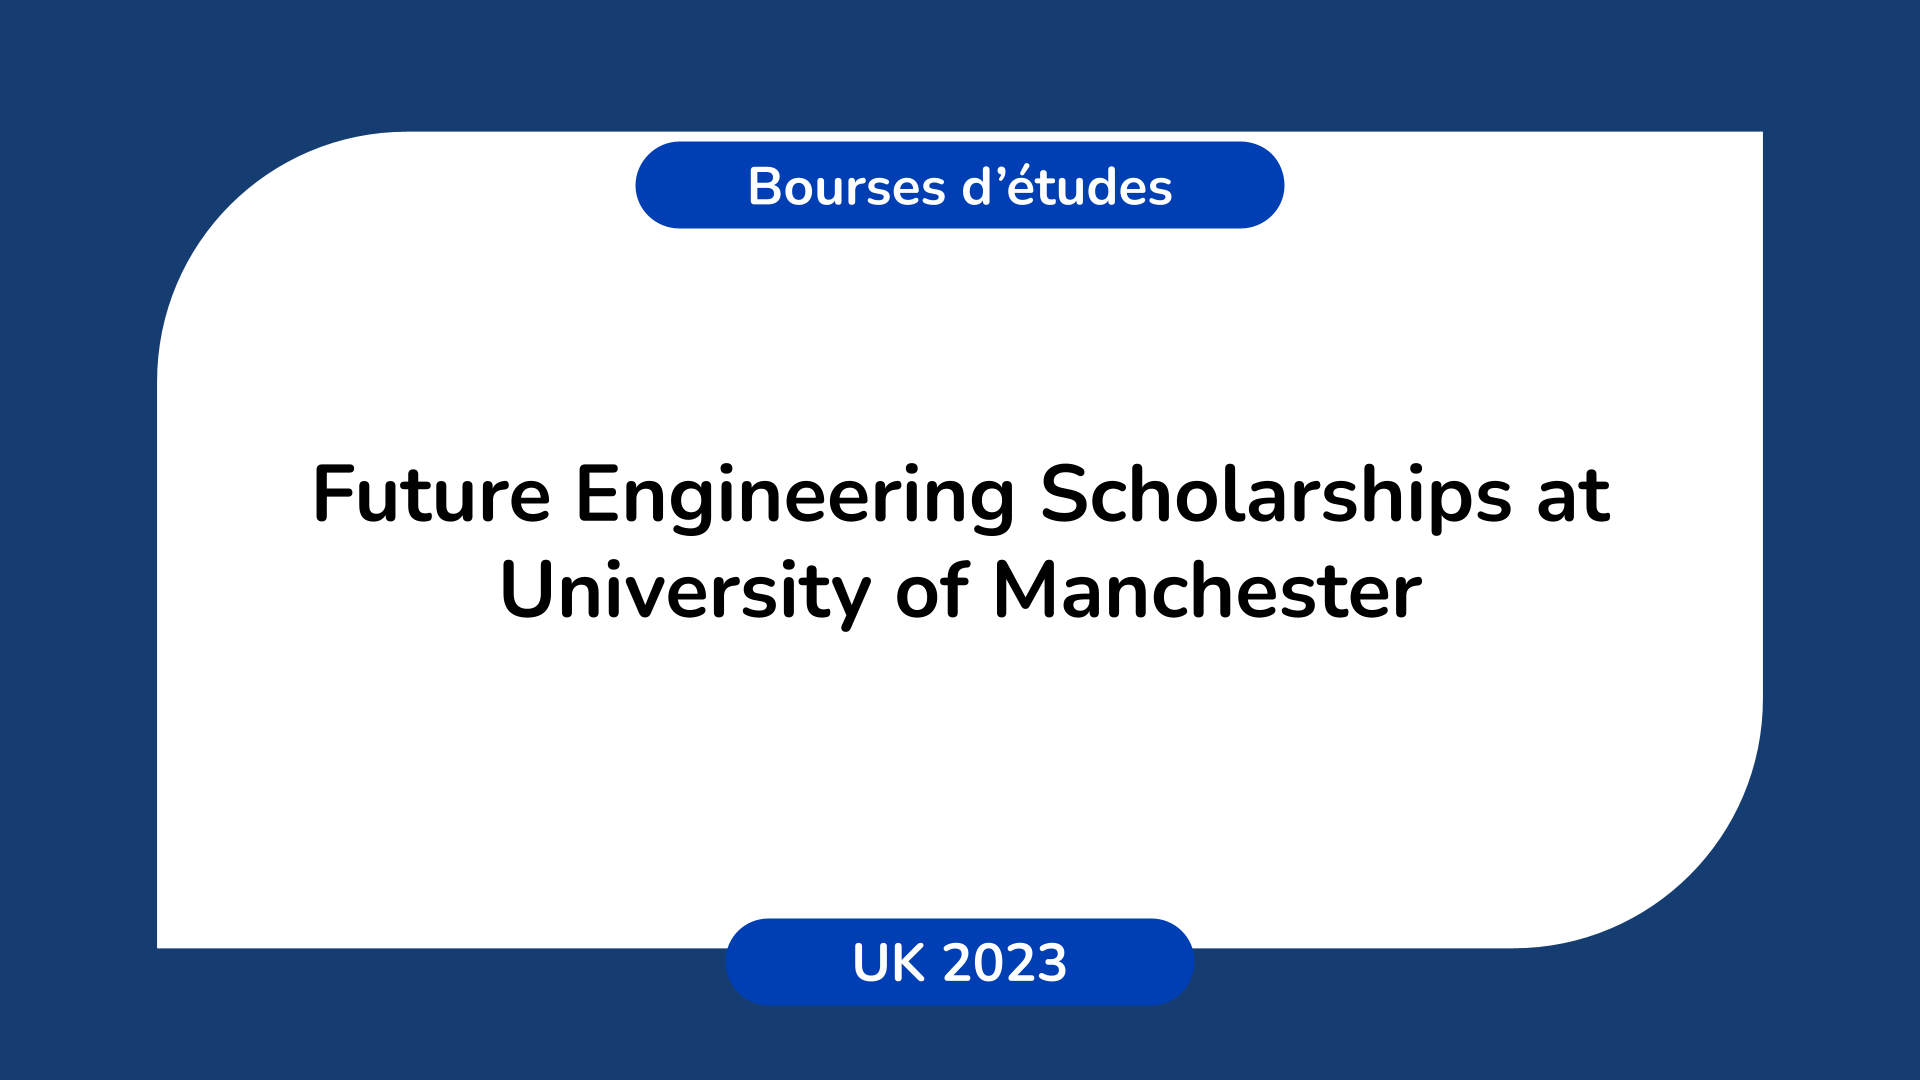 Future Engineering Scholarships at University of Manchester in UK in 2023